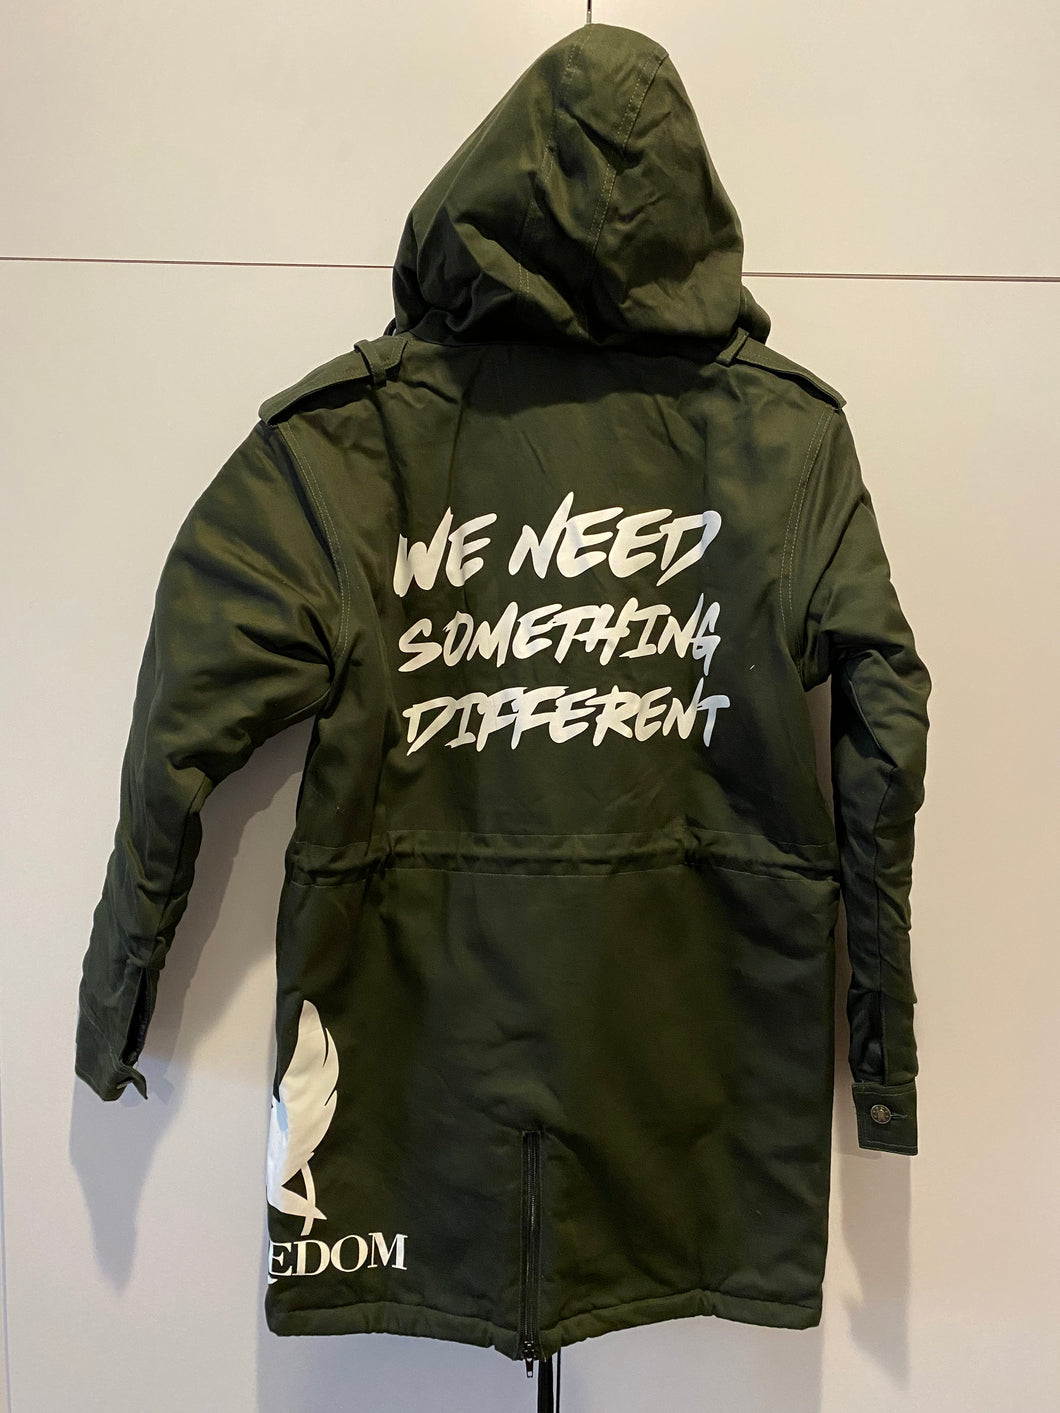 Limited Edition: We Need Something Different Army Jacket